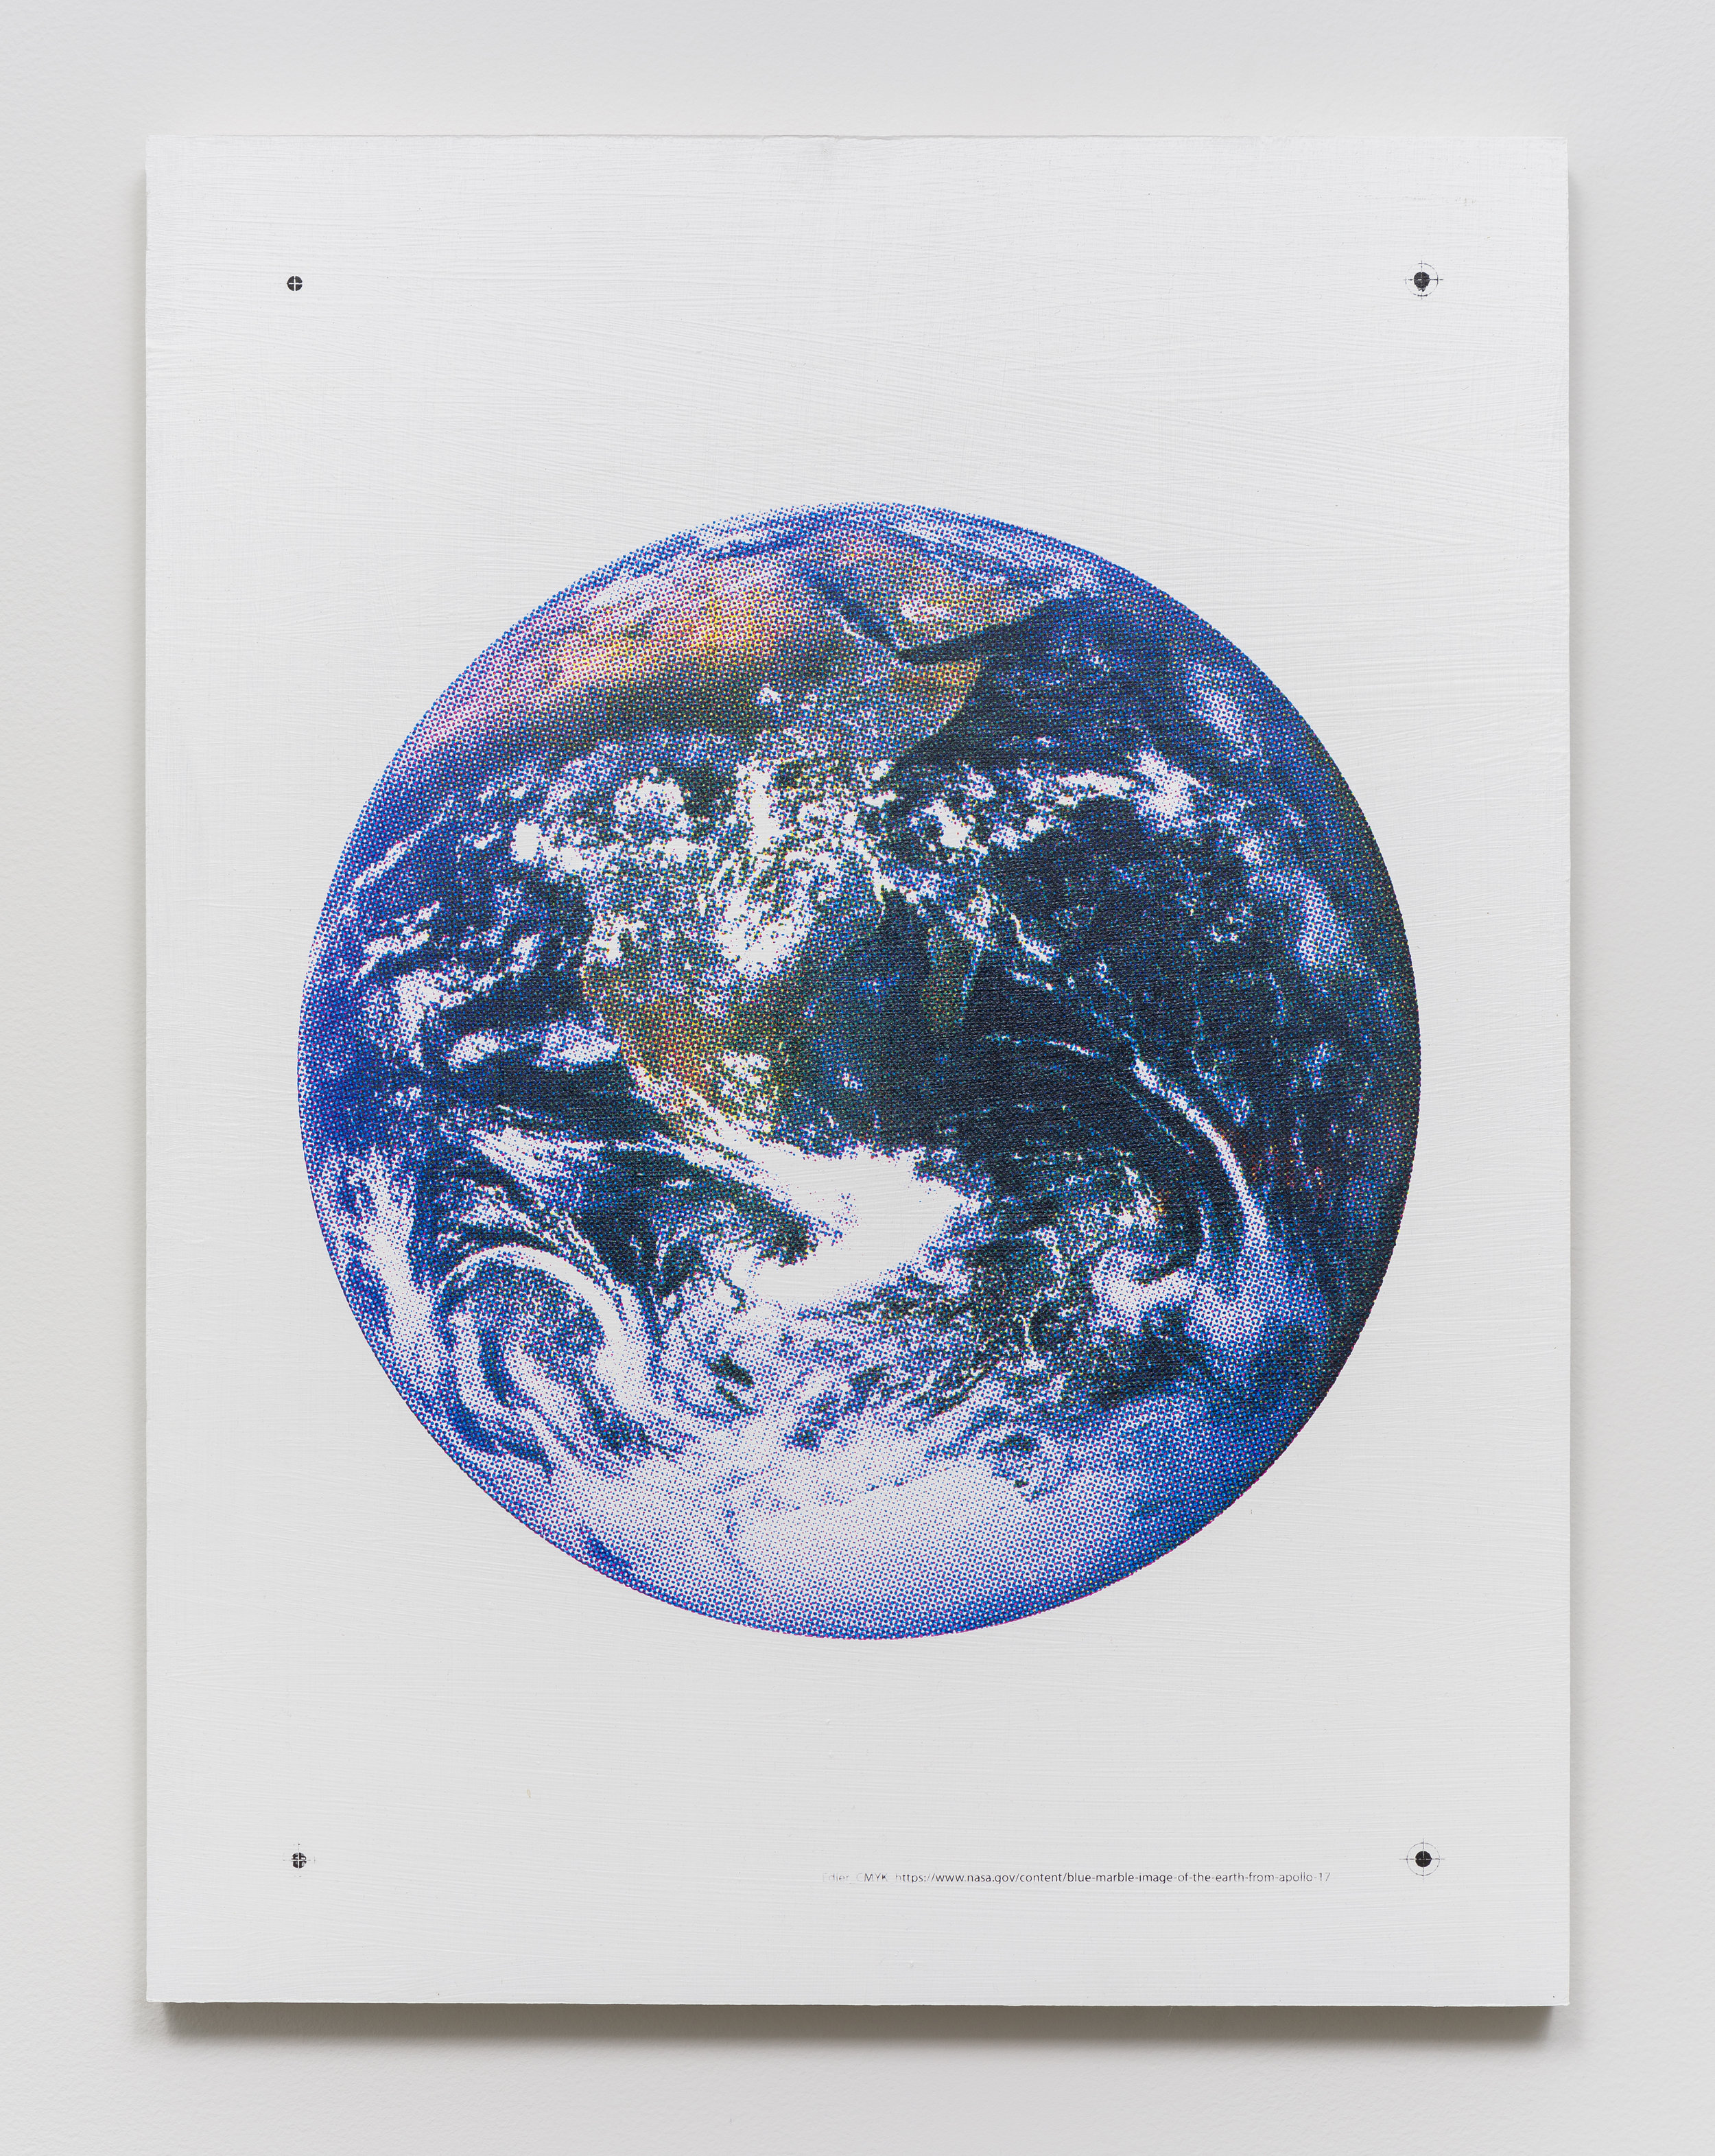   Don Edler  CMYK Blue Marble   2019 Gesso and silkscreen ink on panel 24 in x 18 in  Photo by Ruben Diaz 